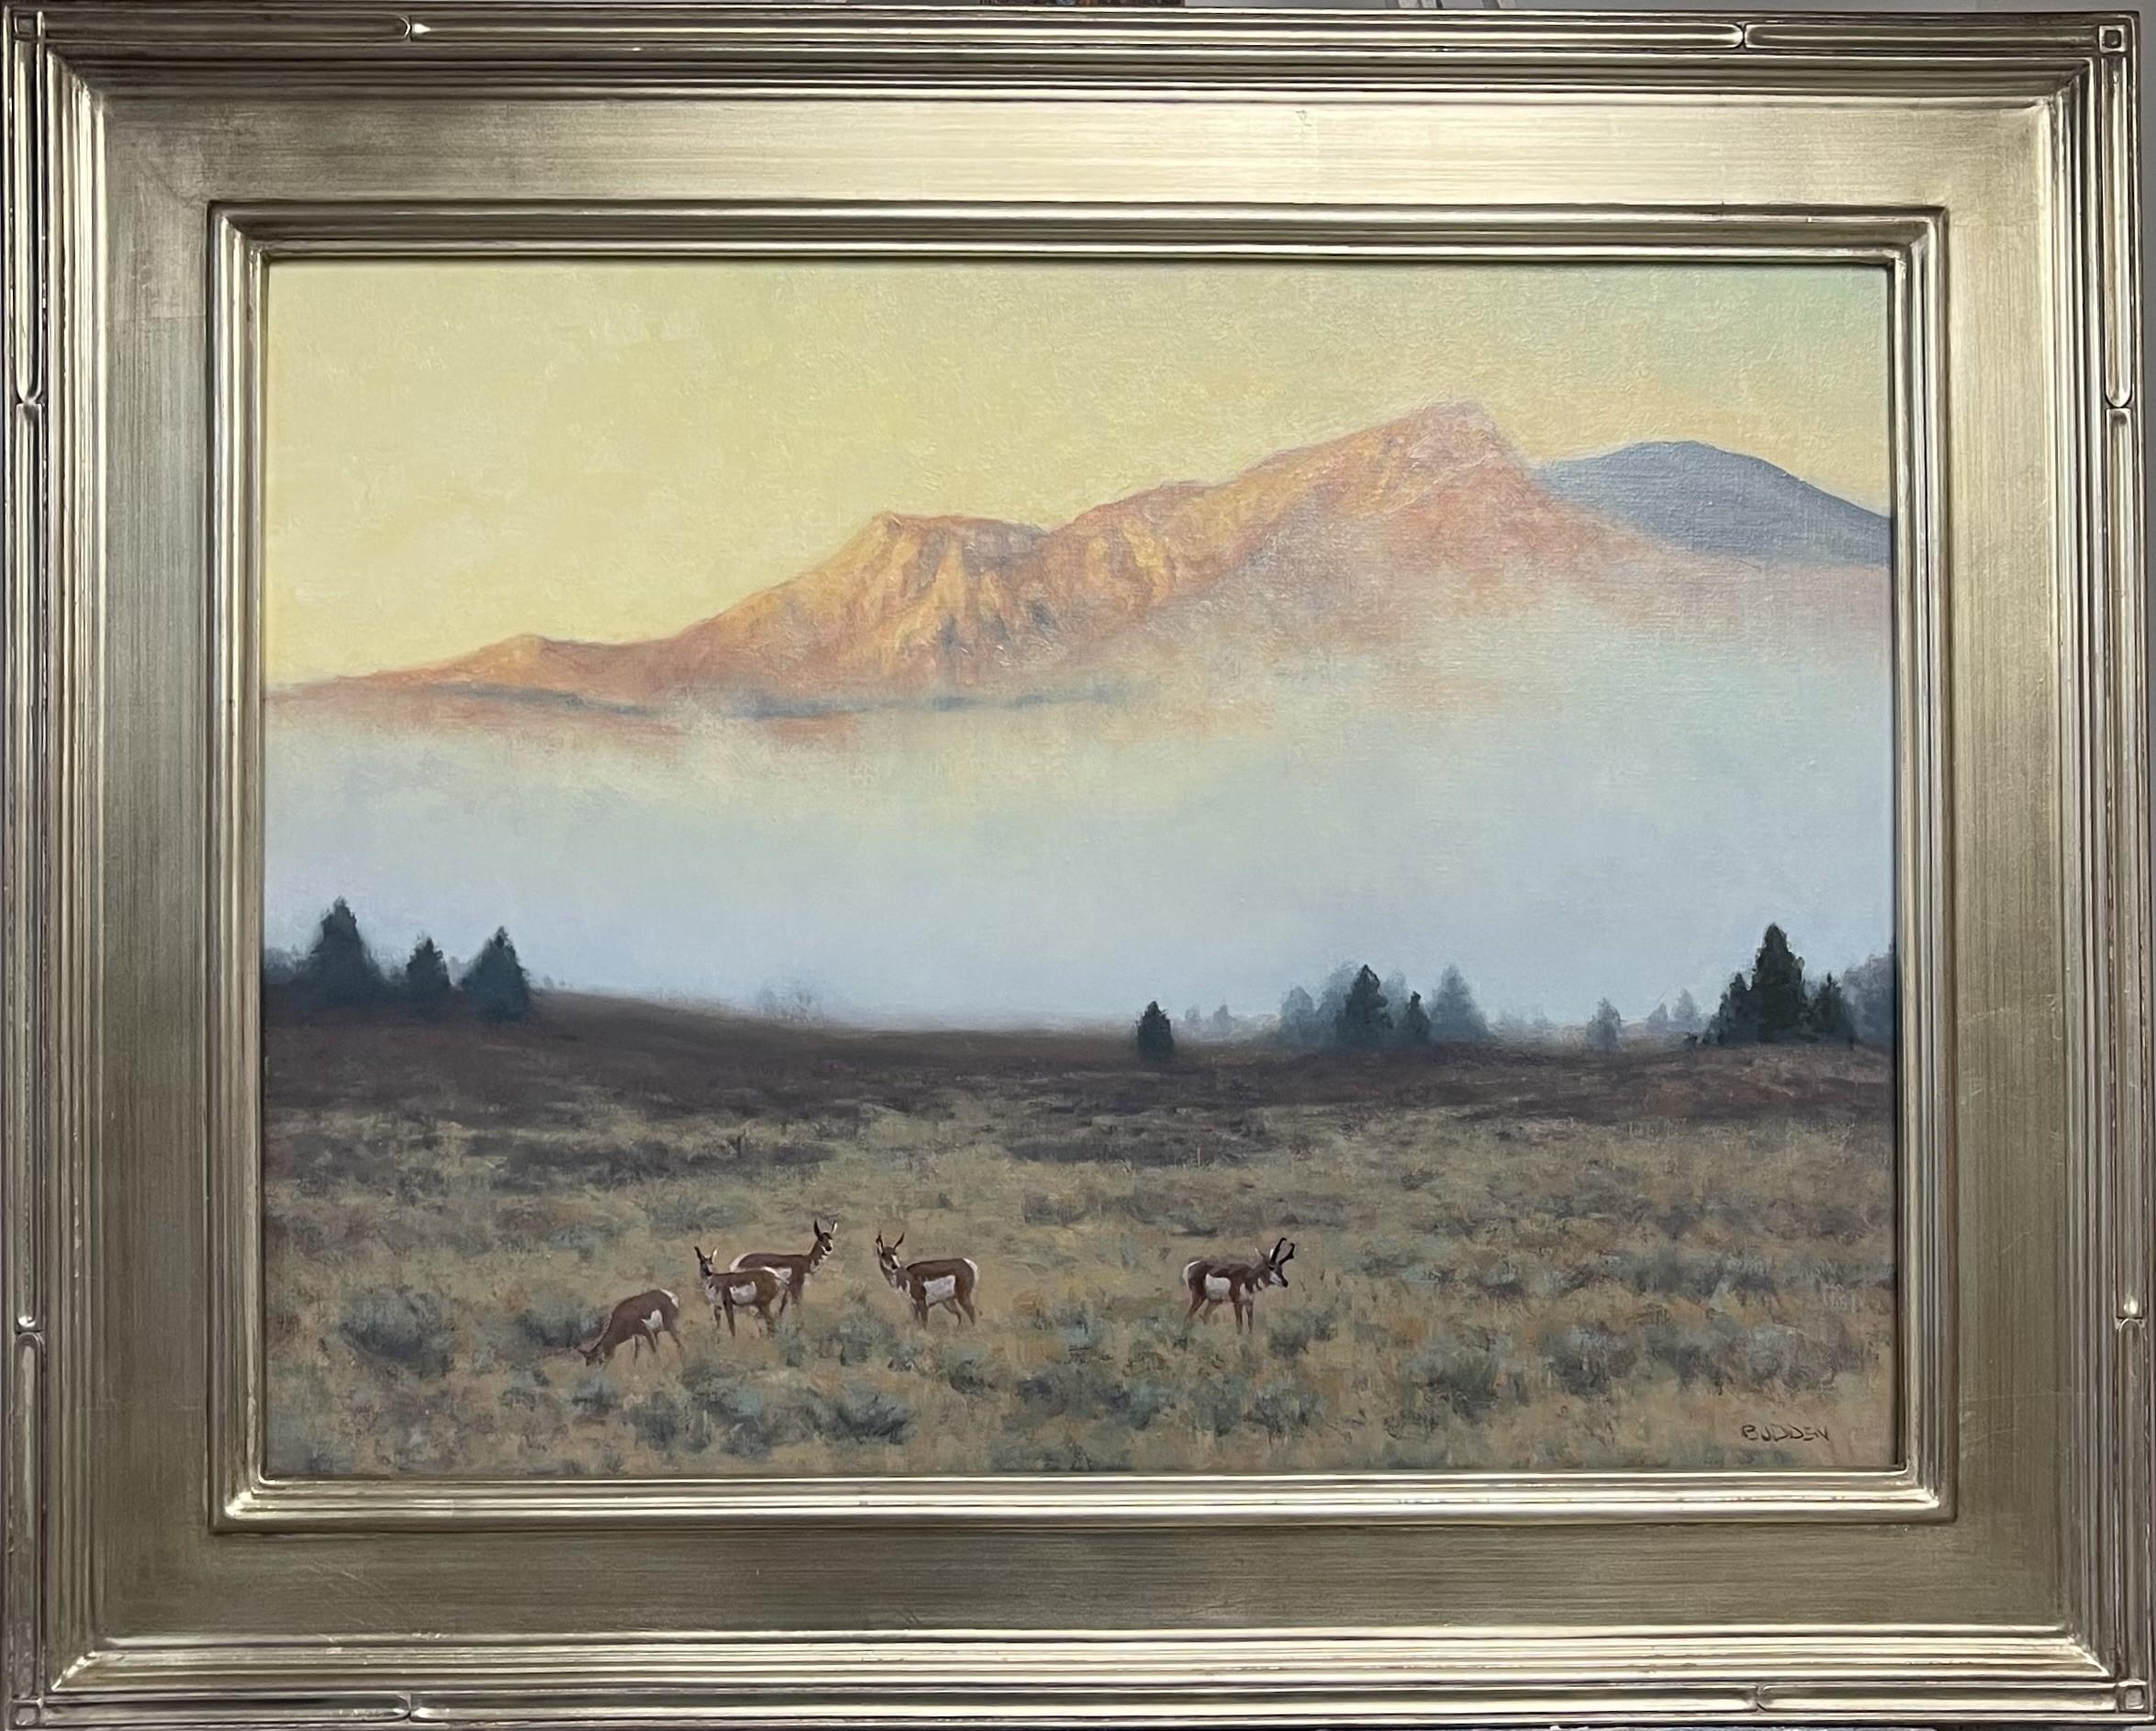 Prairie Nomads, Pronghorn Antelope
oil/linen
18 x 24 image unframed 24.5 x 30.5 framed
An oil painting on linen canvas by award winning contemporary artist Michael Budden that showcases a herd of pronghorn antelope in their natural environment in